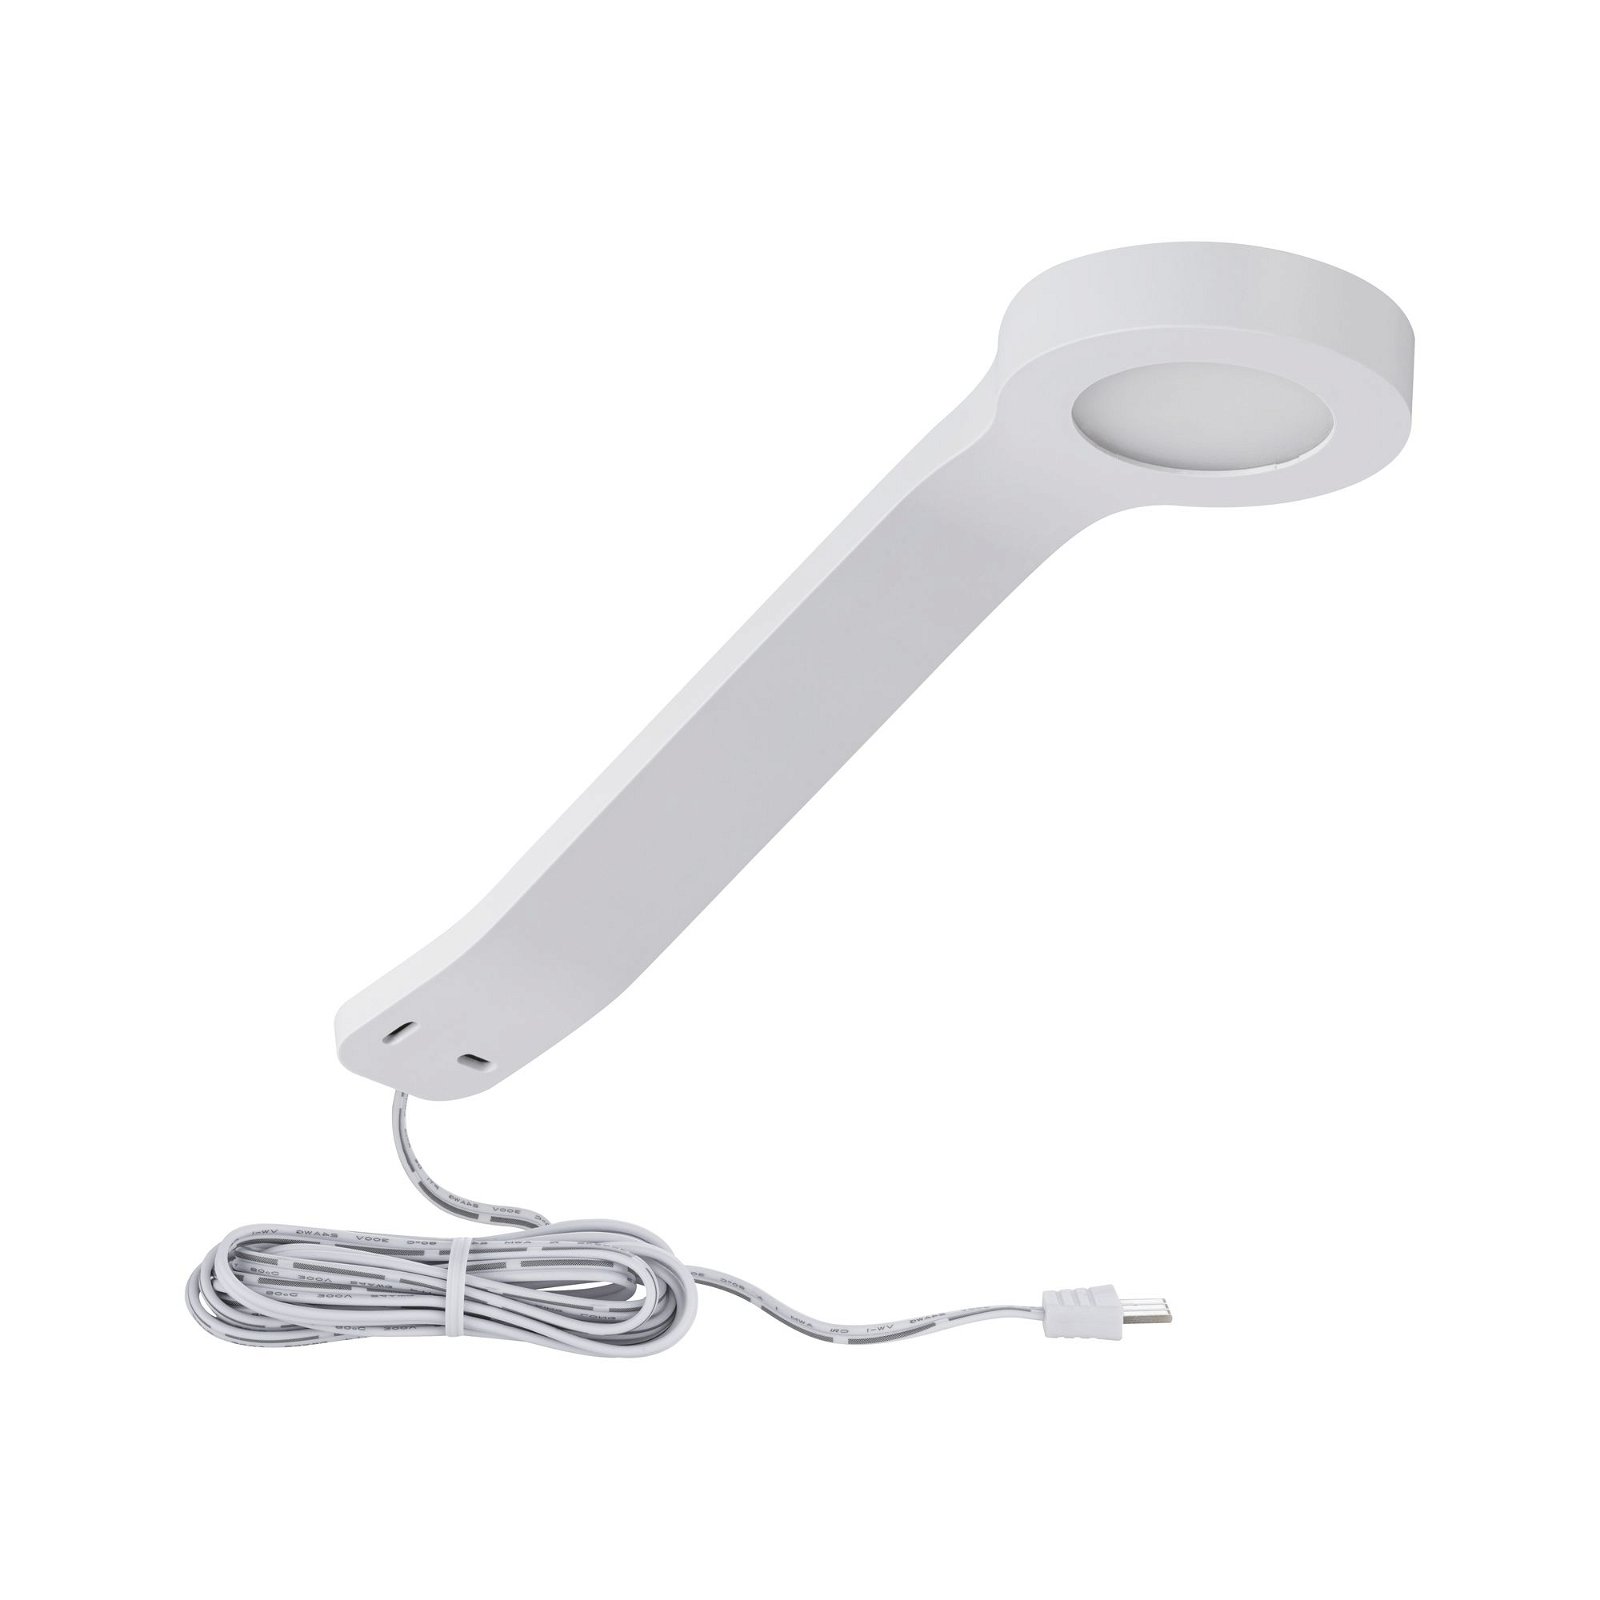 Clever Connect LED Spot Mike Tunable White 2W Weiß matt